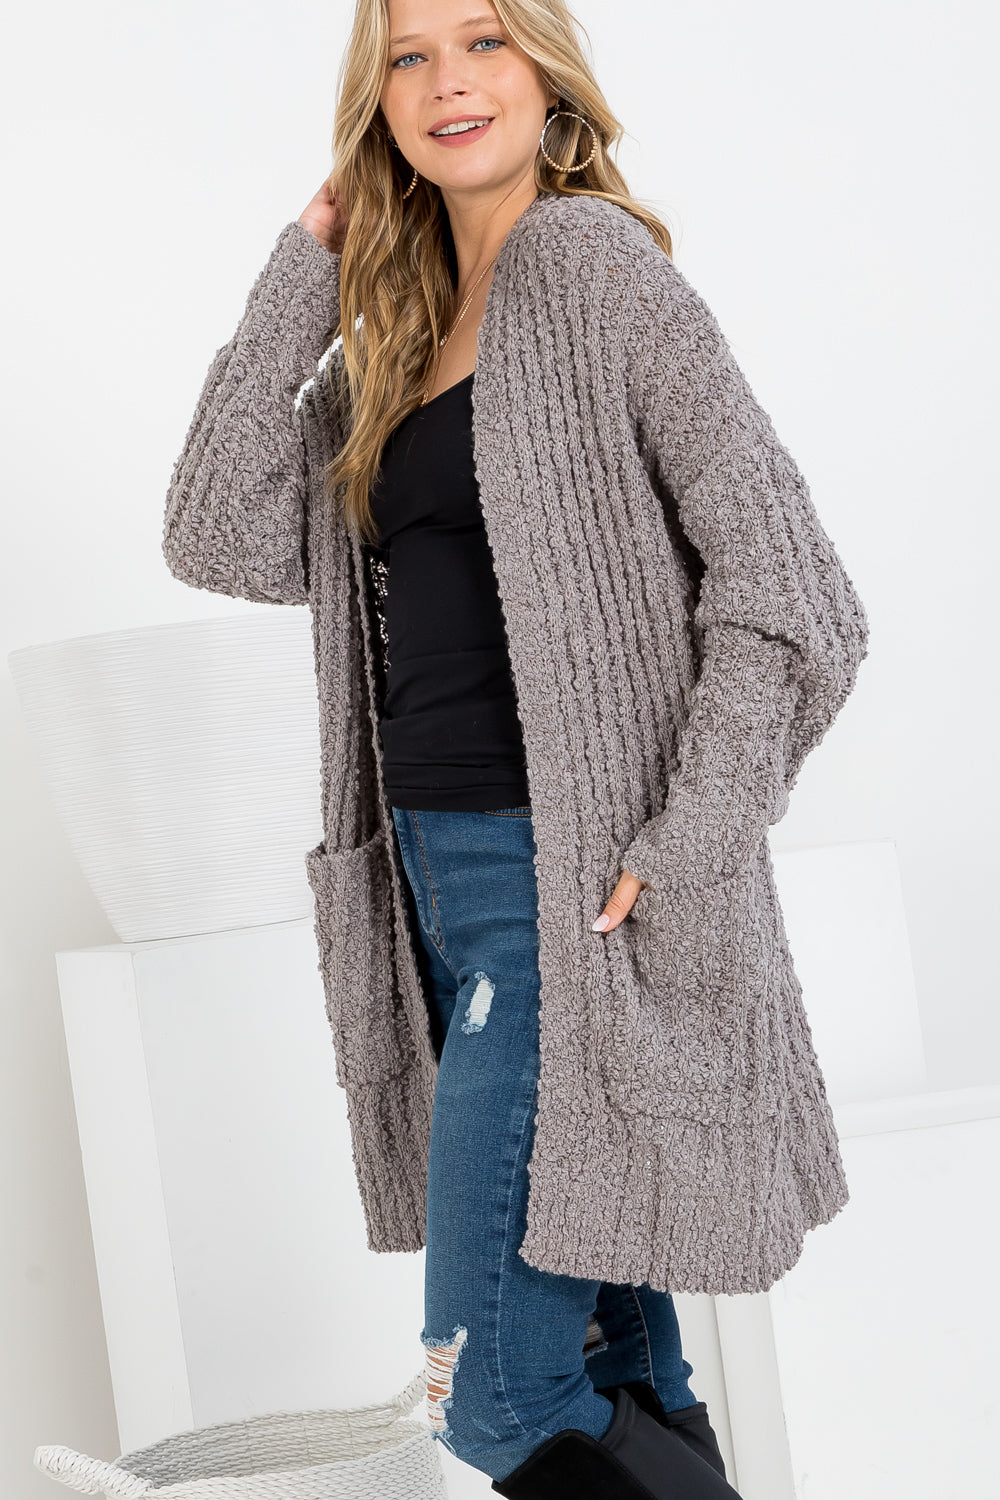 Plus Size Batwing Long Sleeve Open Front with Pockets Popcorn Cardigan